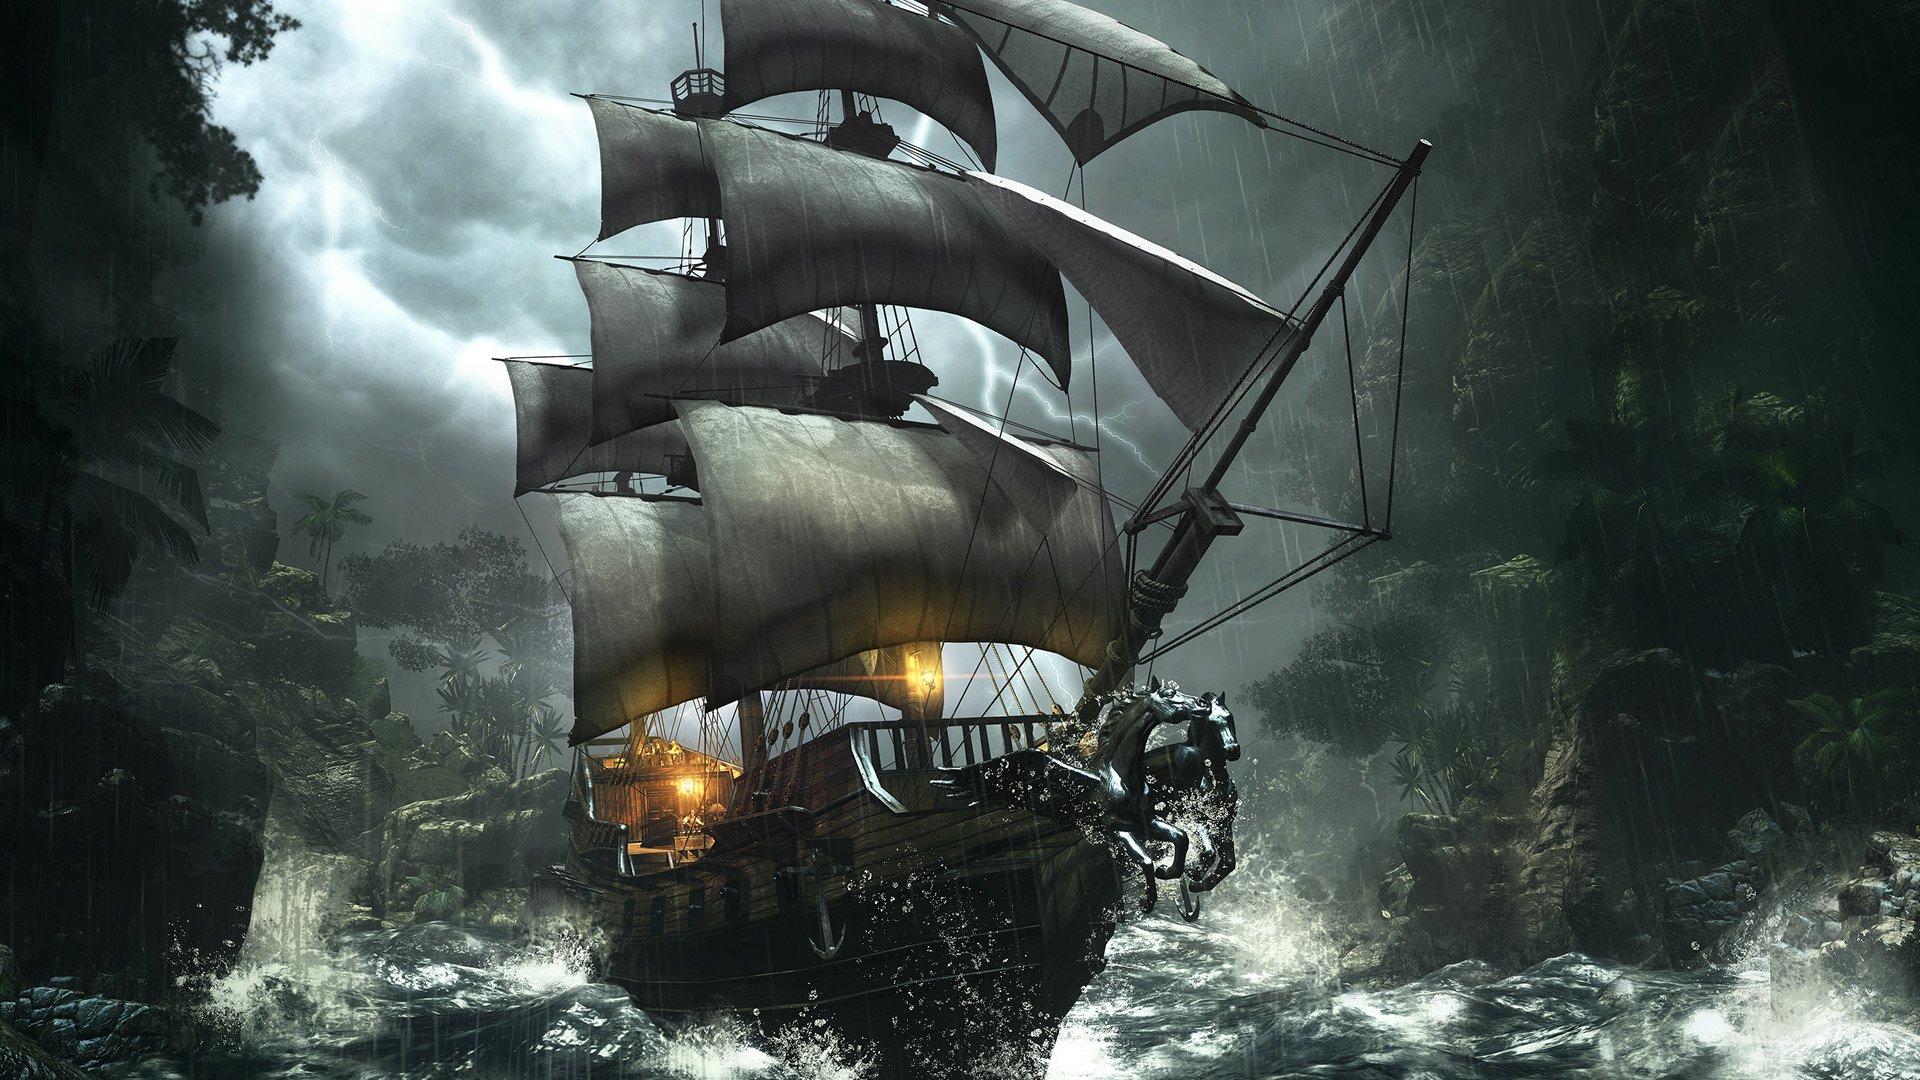 Ghost Pirate Ship Painting. Explore